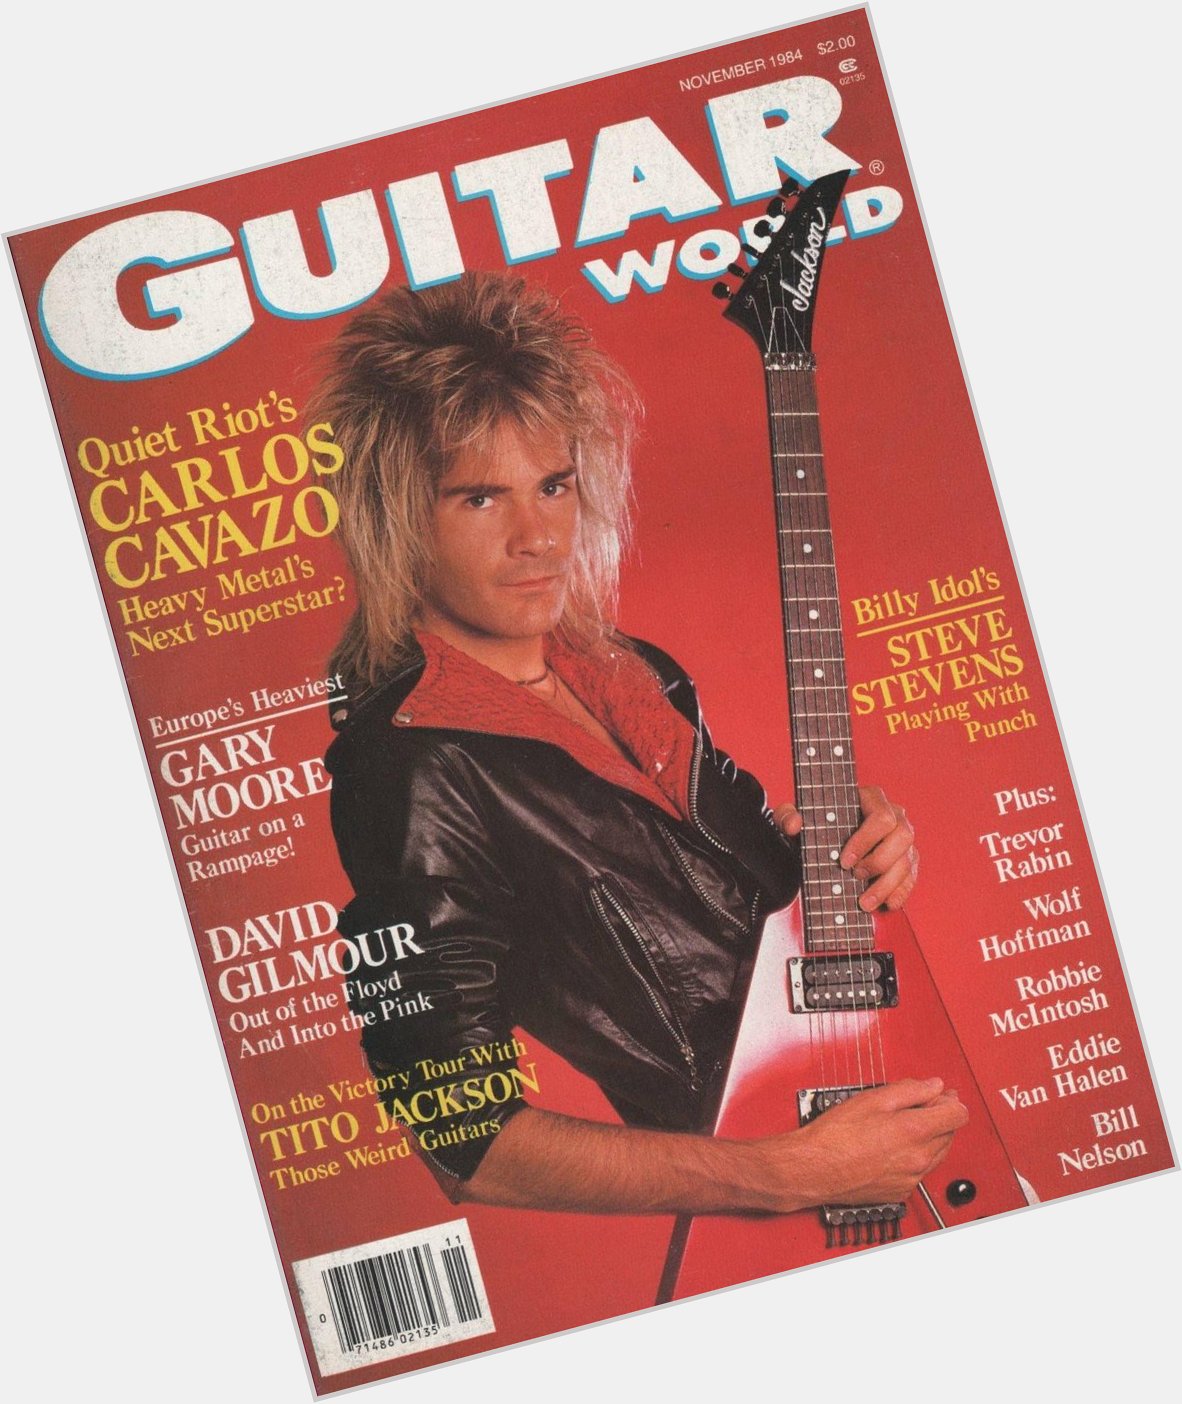 Happy Birthday to former Quiet Riot guitarist Carlos Cavazo. He turns 64 today. 